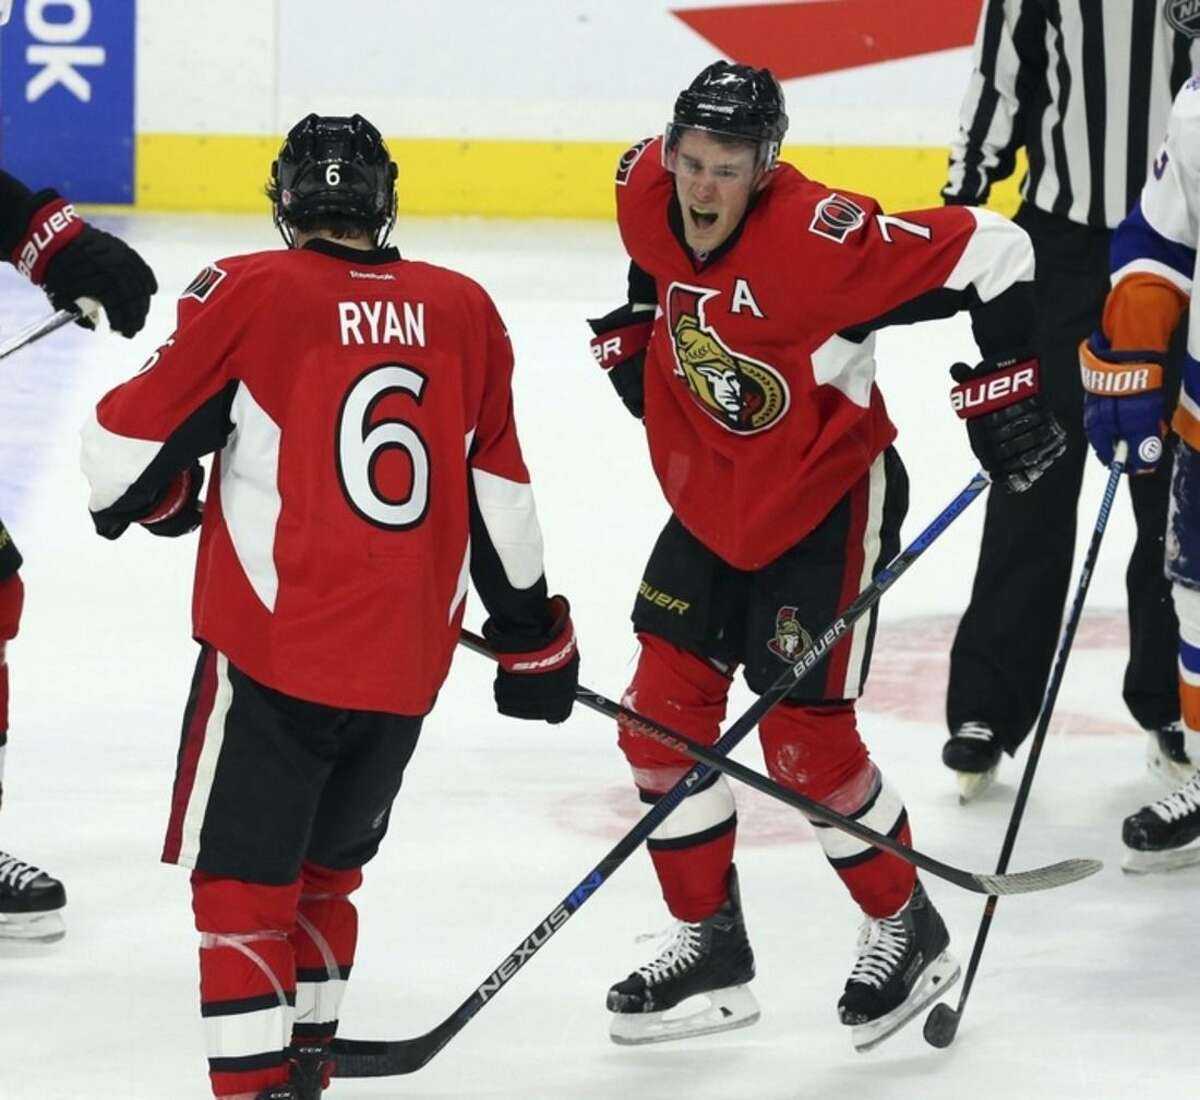 Ottawa Senators' Kyle Turris (7) reacts after being injured during third period NHL action against the New York Islanders in Ottawa, Saturday, Dec. 5, 2015. (Fred Chartrand/The Canadian Press via AP)